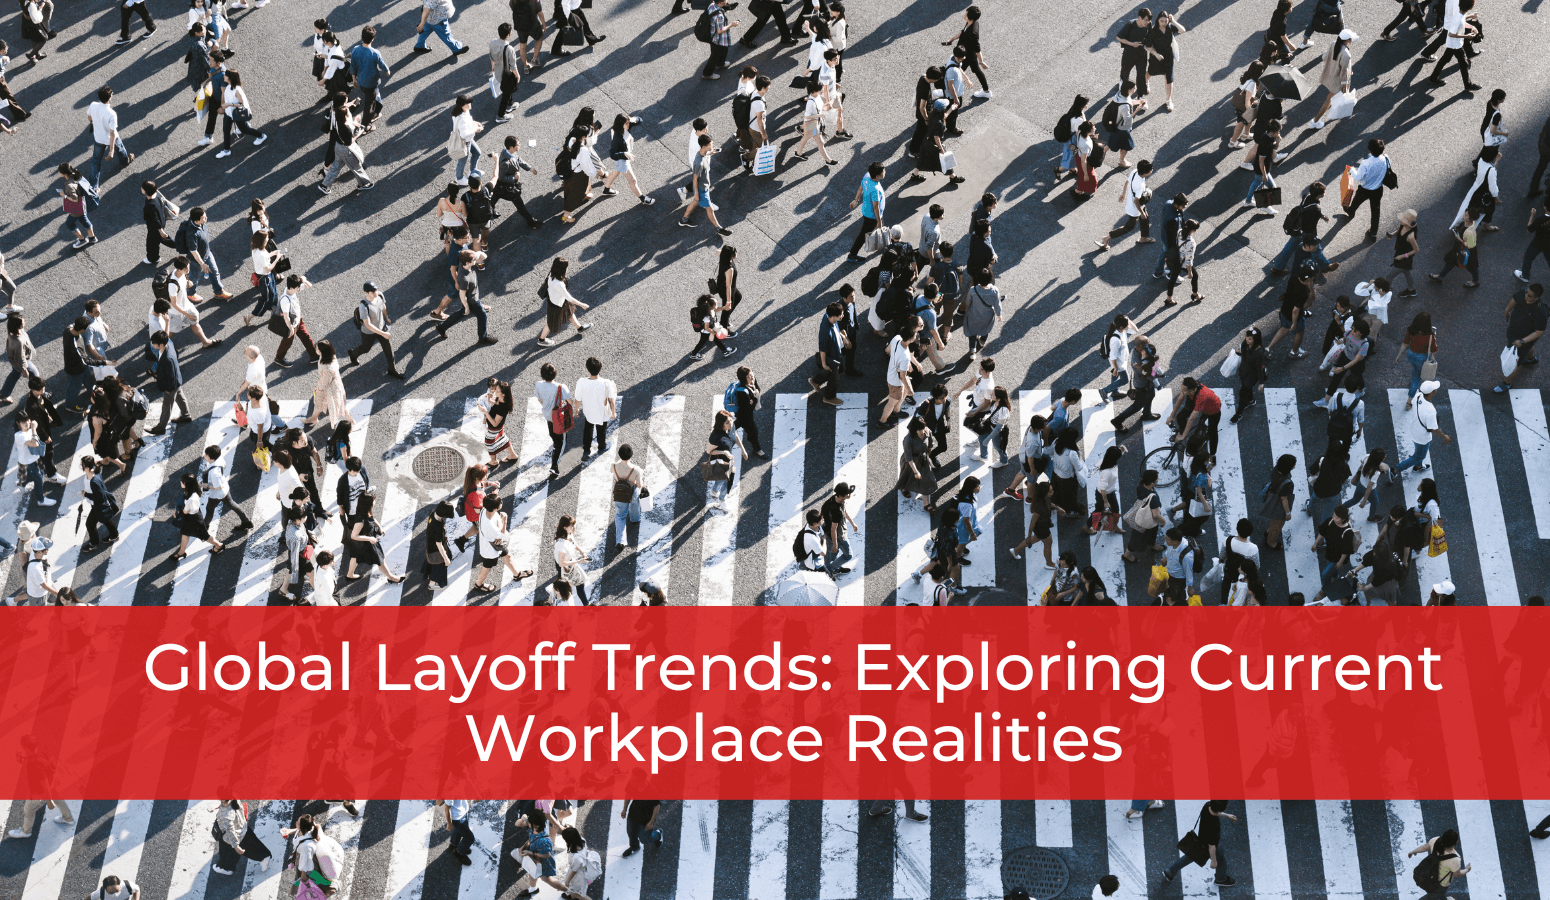 Featured image for “Global Layoff Trends: Exploring Current Workplace Realities”